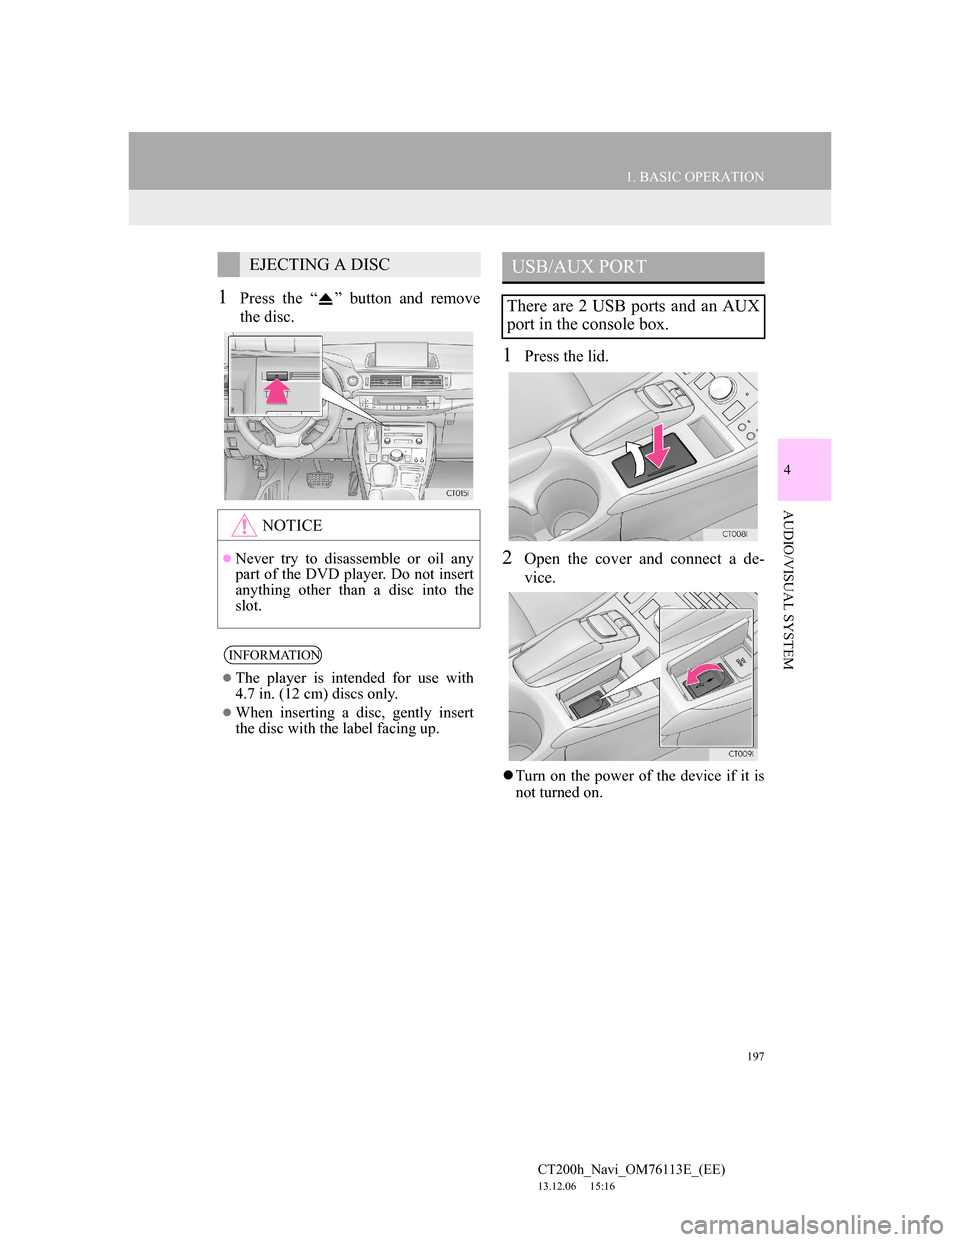 Lexus CT200h 2014  Navigation manual (in English) 197
1. BASIC OPERATION
4
AUDIO/VISUAL SYSTEM
CT200h_Navi_OM76113E_(EE)
13.12.06     15:16
1Press the “ ” button and remove
the disc.
1Press the lid.
2Open the cover and connect a de-
vice.
Turn